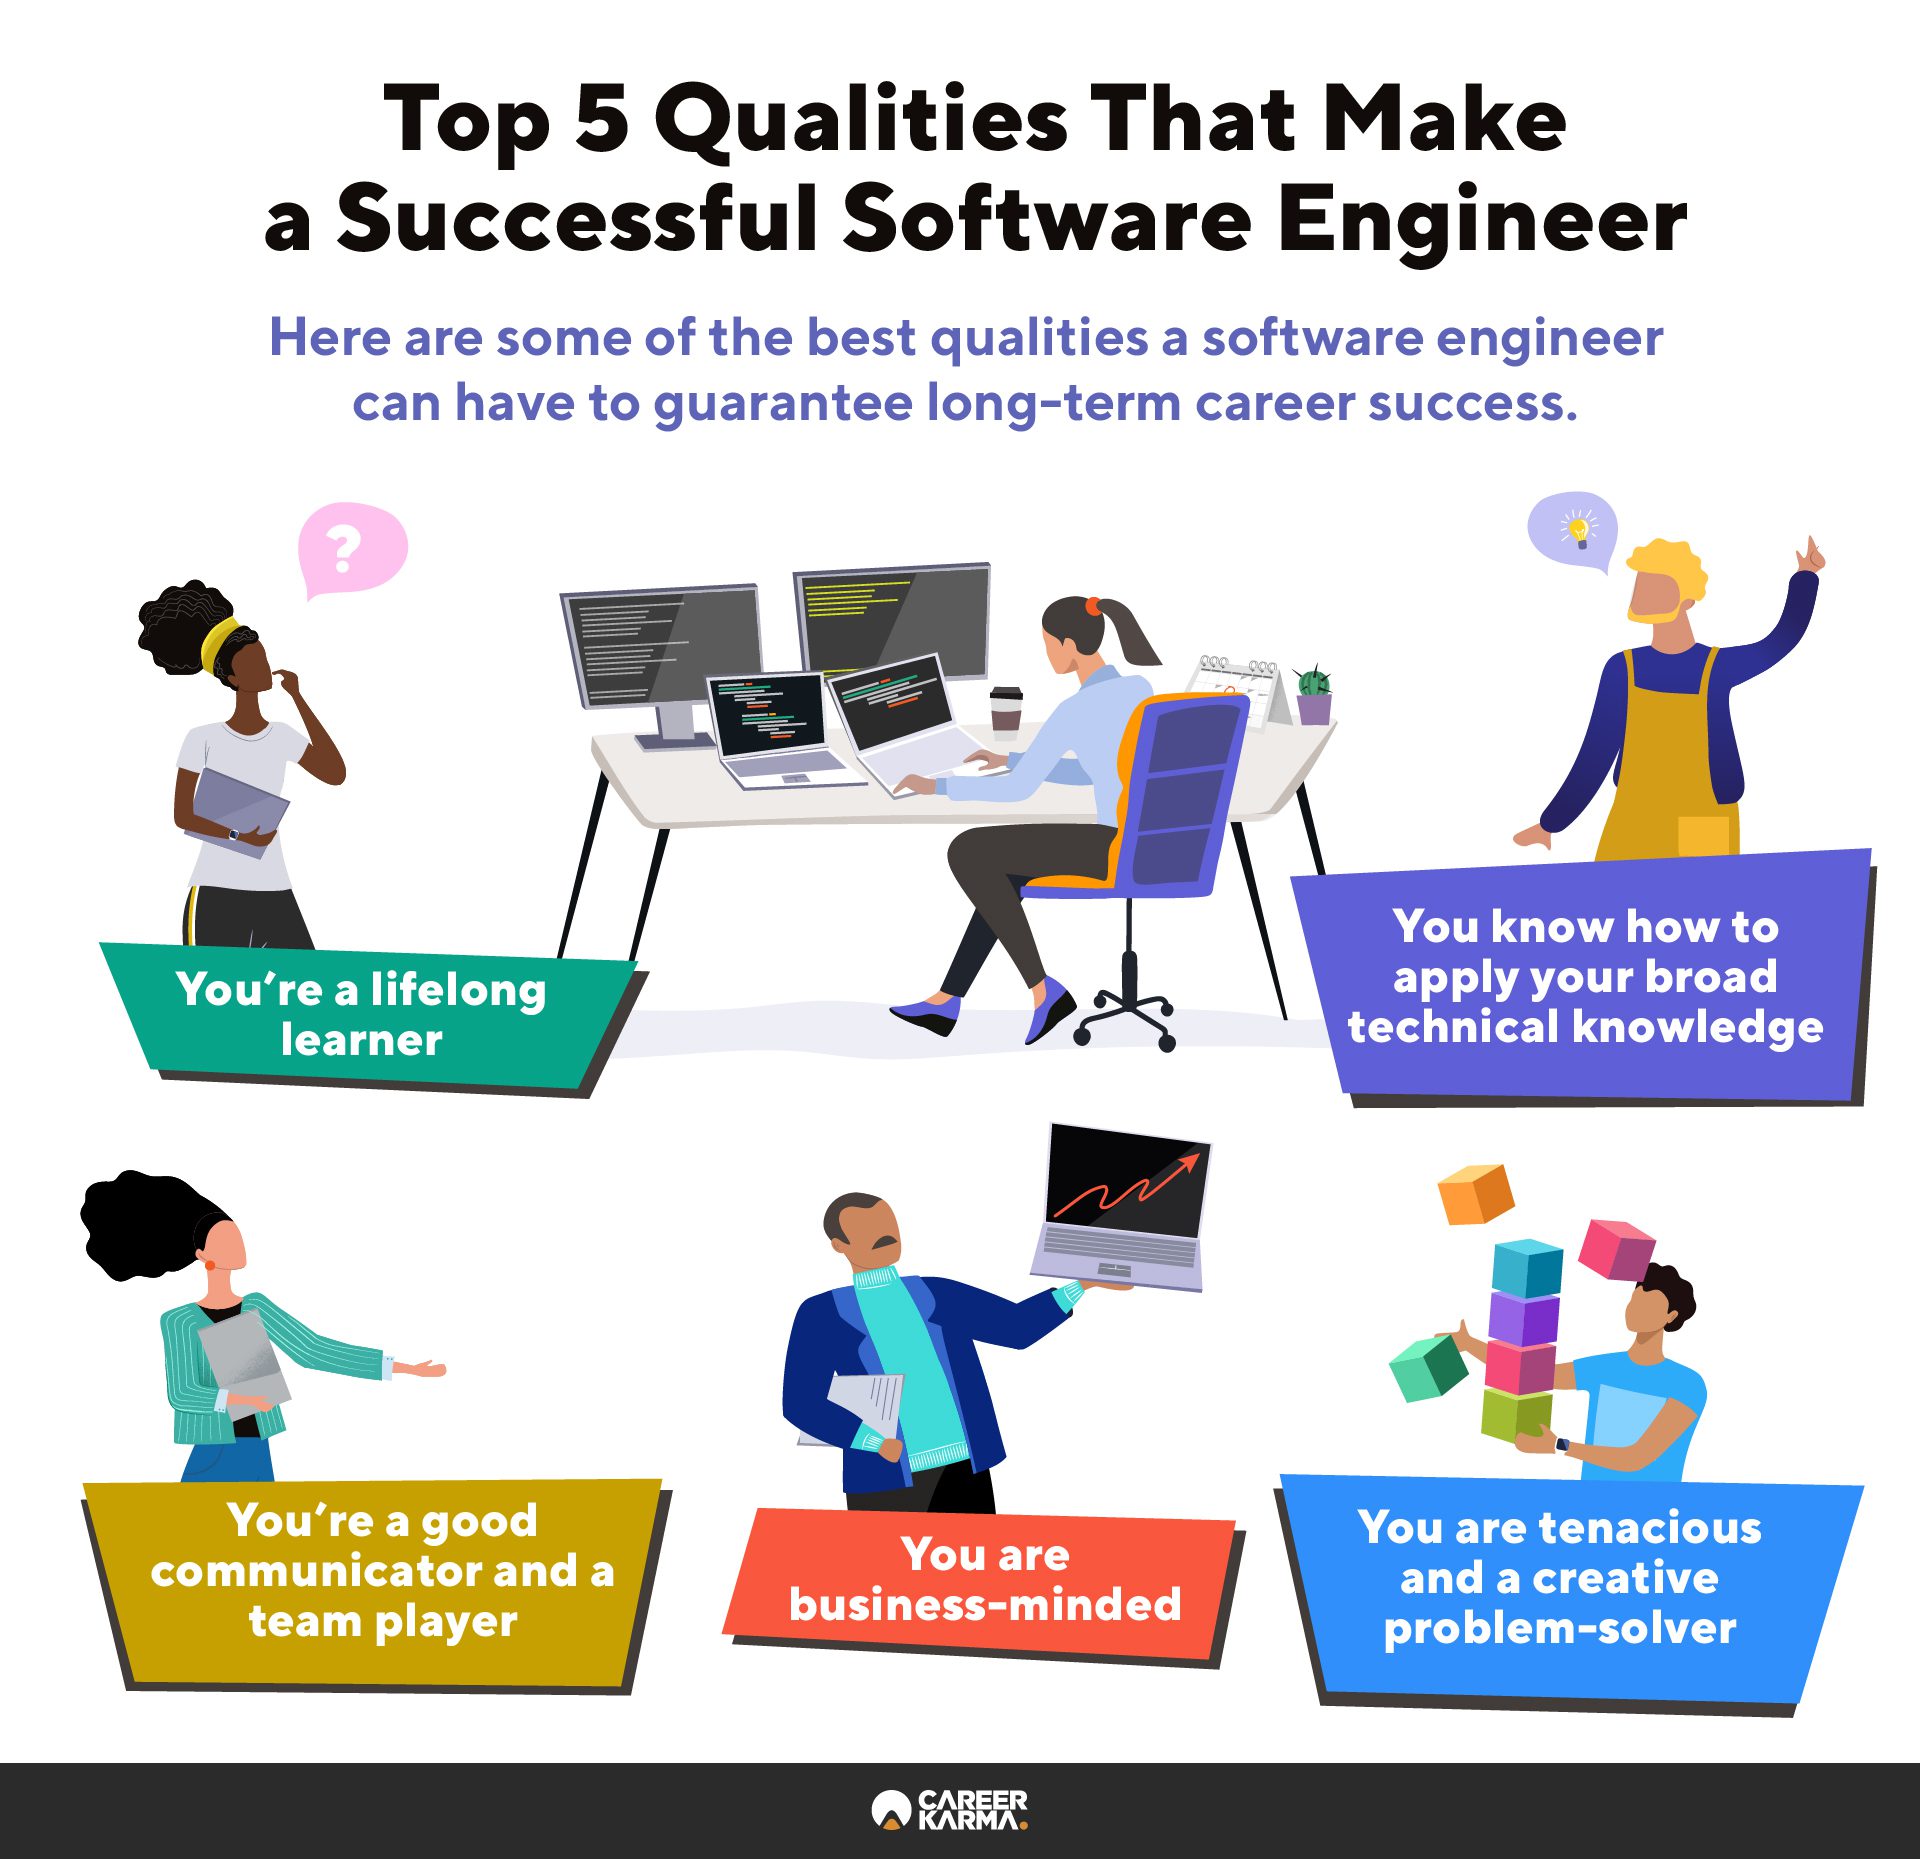 What are the key skills for a successful software engineer